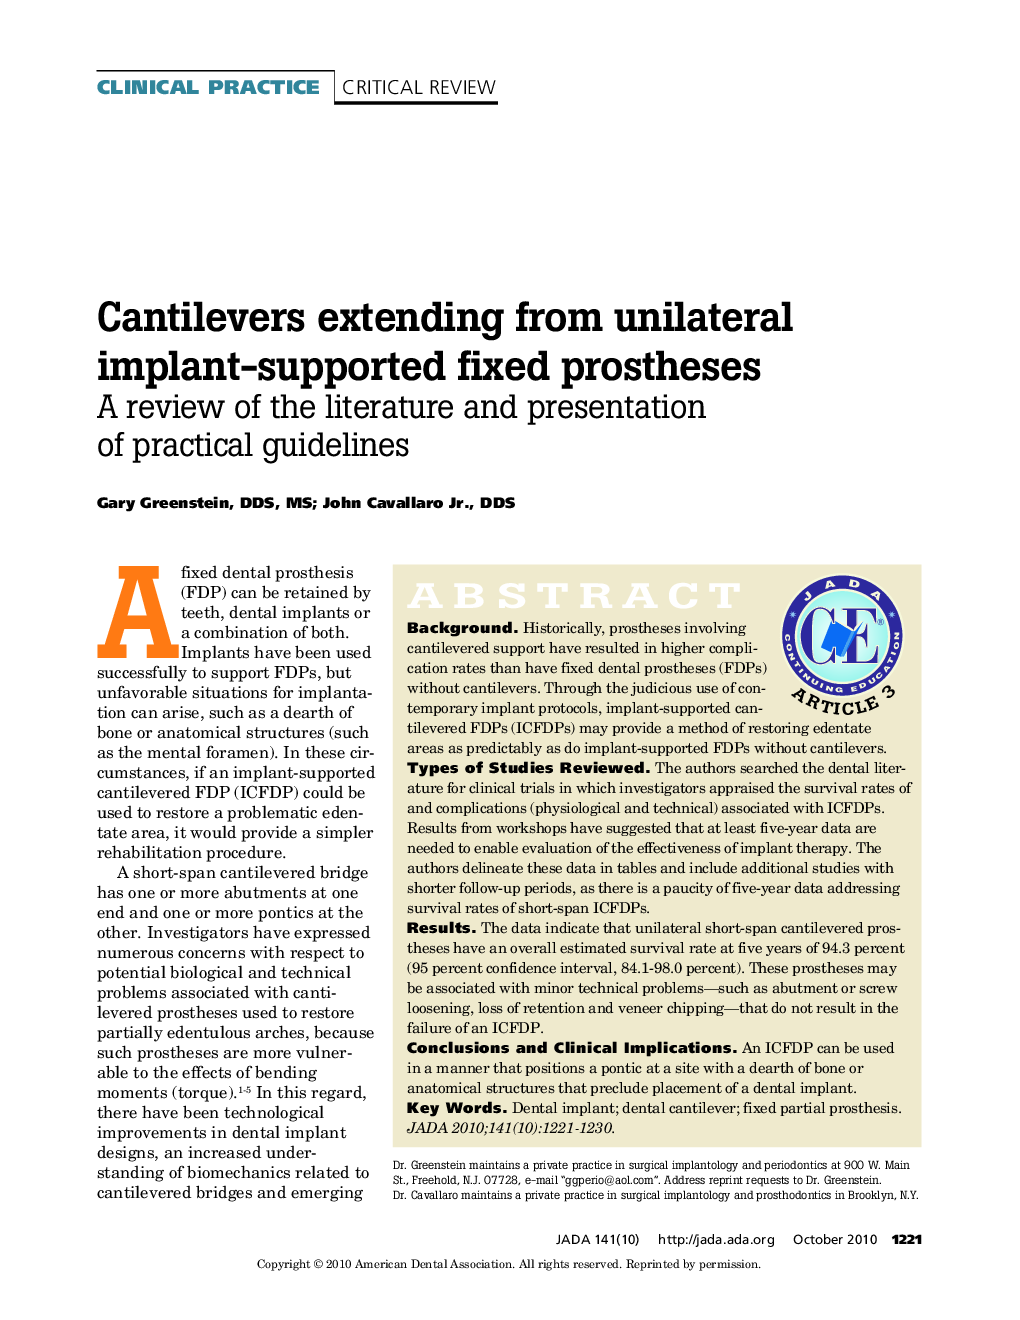 Cantilevers Extending From Unilateral Implant-Supported Fixed Prostheses 